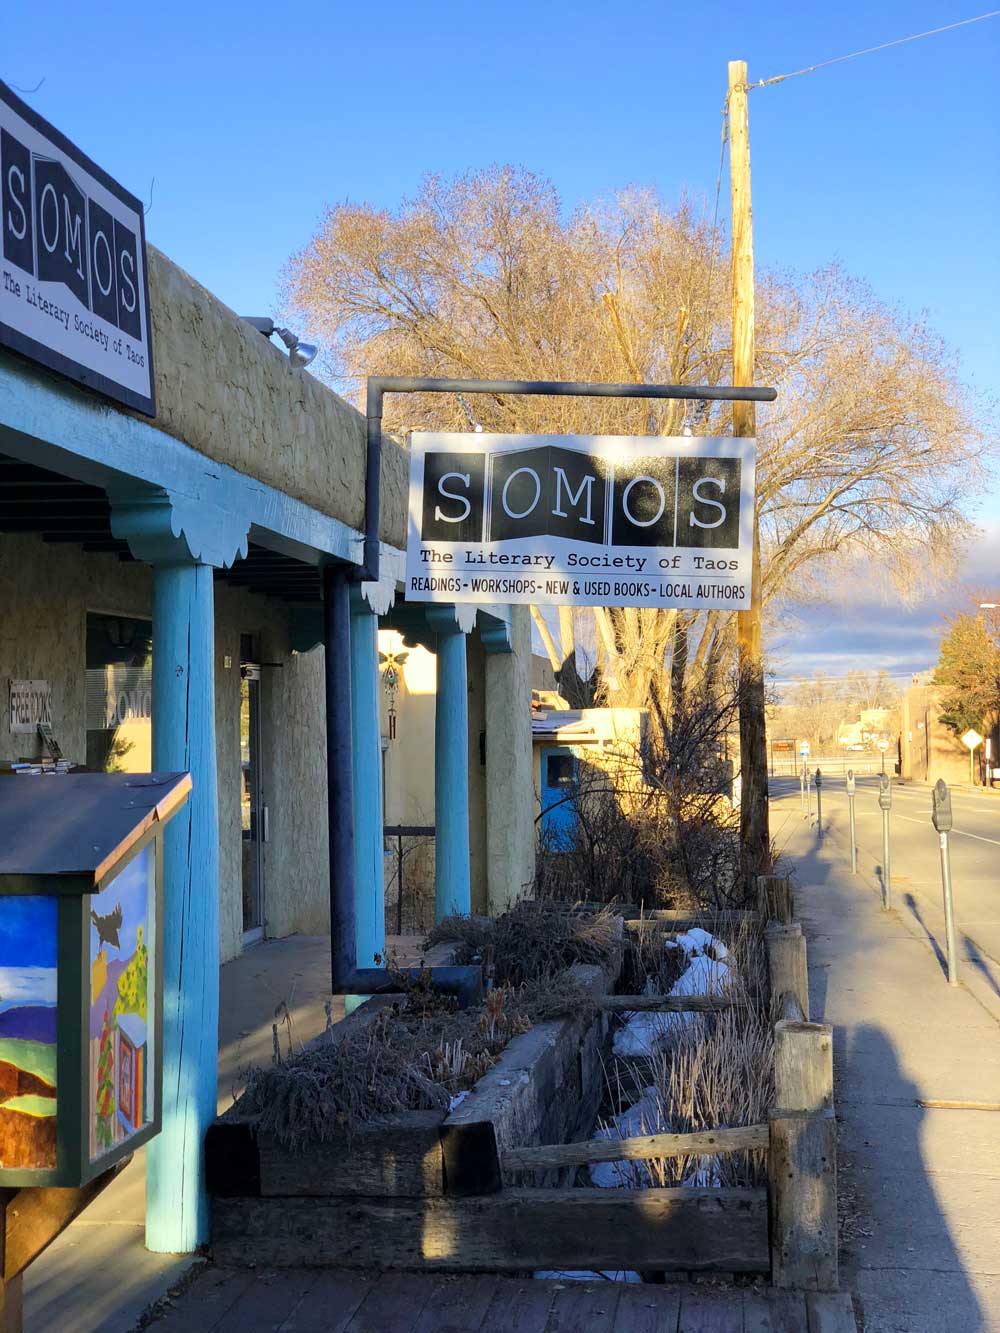 Somos sign and storefront